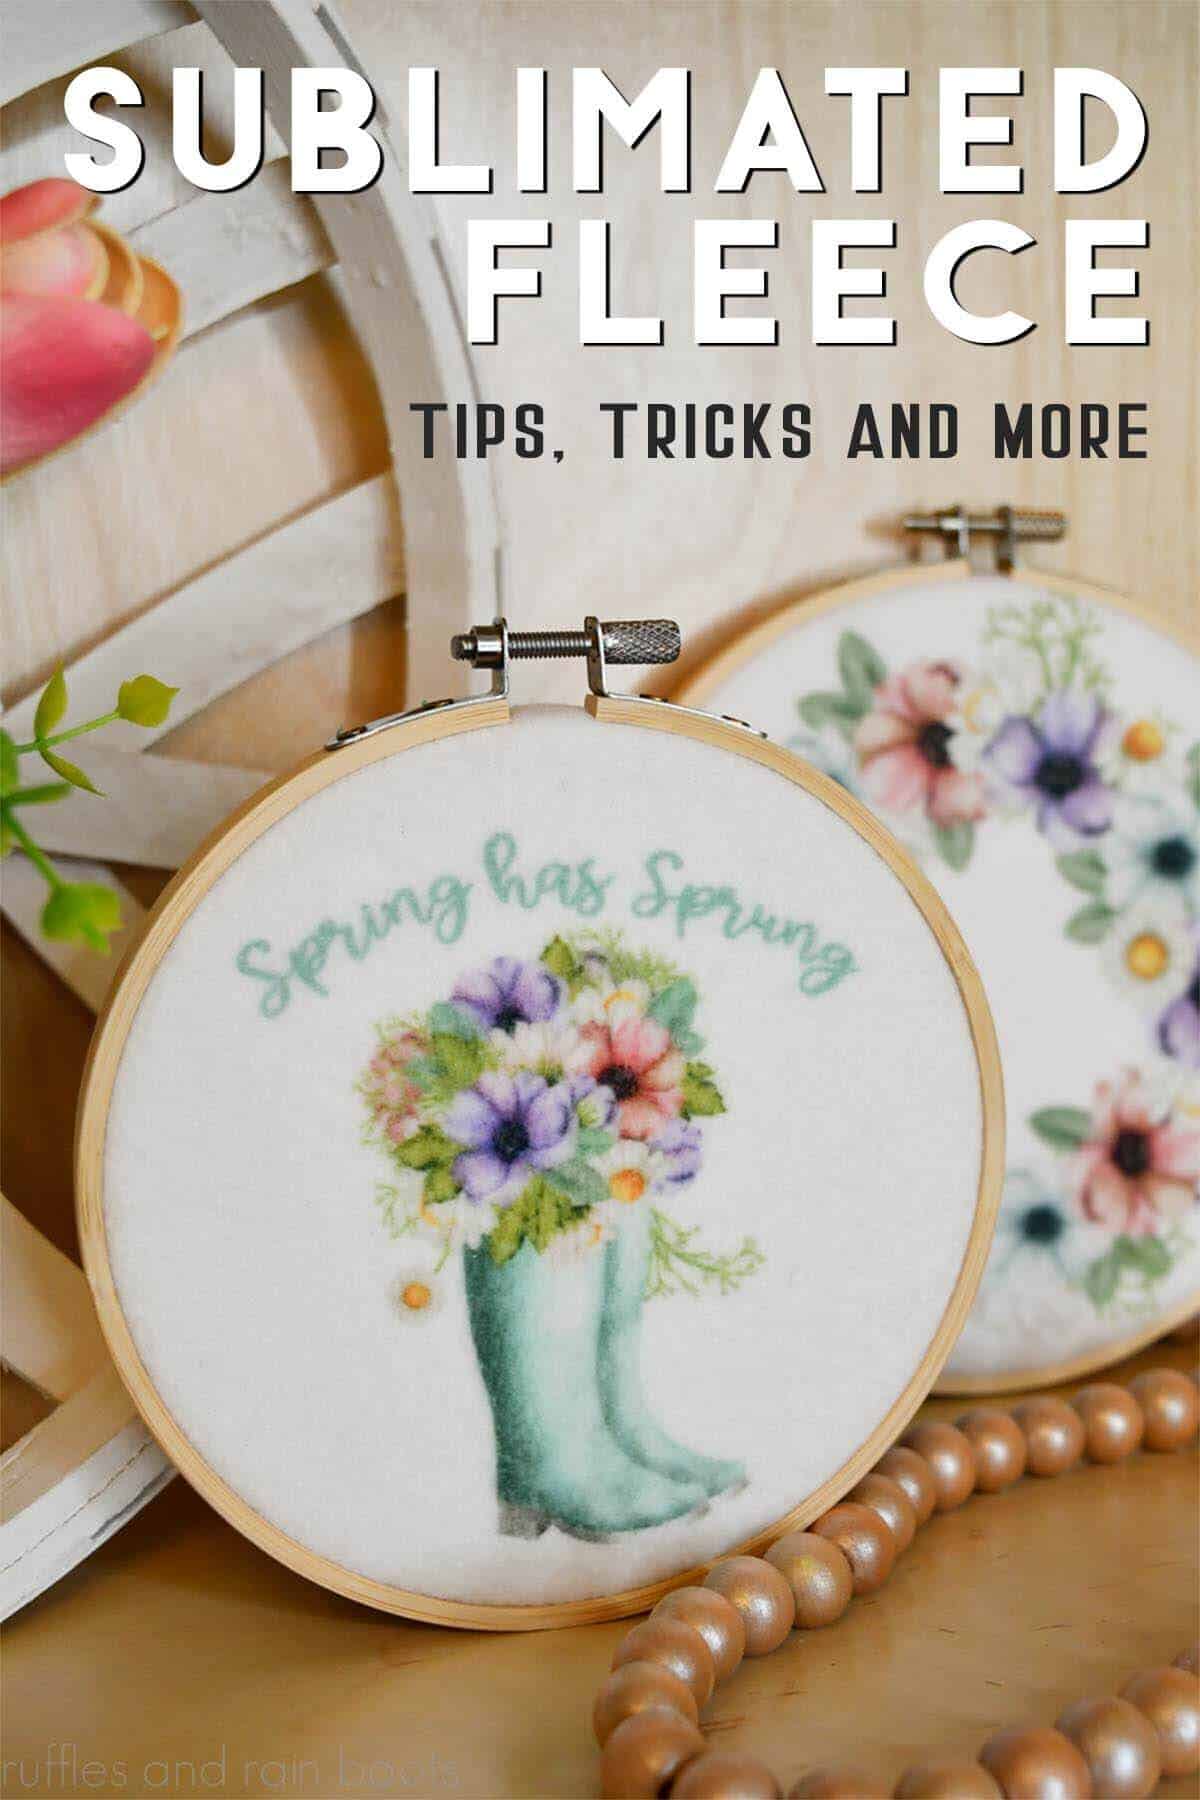 Vertical image of sublimated fleece Spring has Sprung embroidery hoop with text which reads sublimated fleece tips, tricks, time, temperature and more.